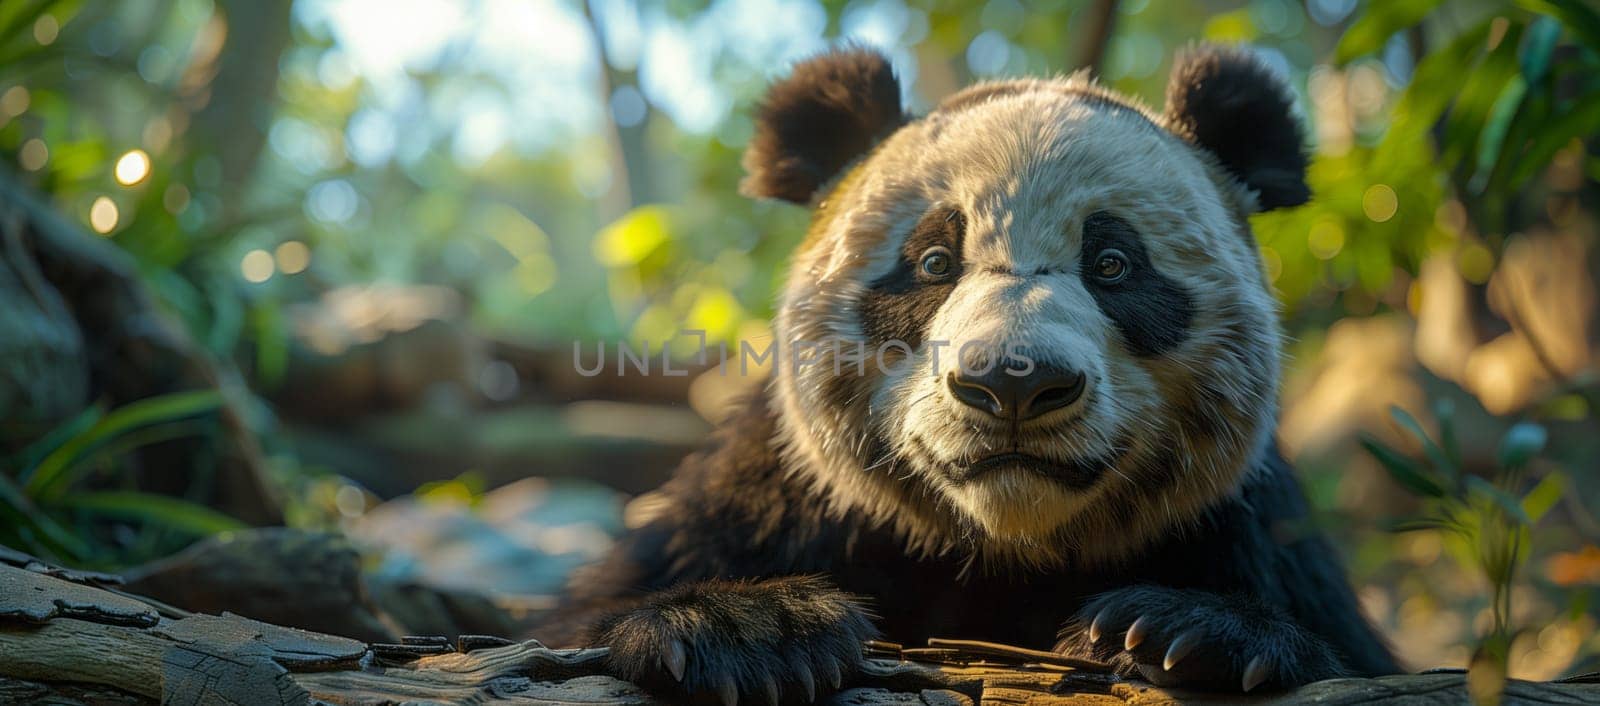 A carnivorous panda bear lounges on a rock in the forest, gazing at the camera by richwolf